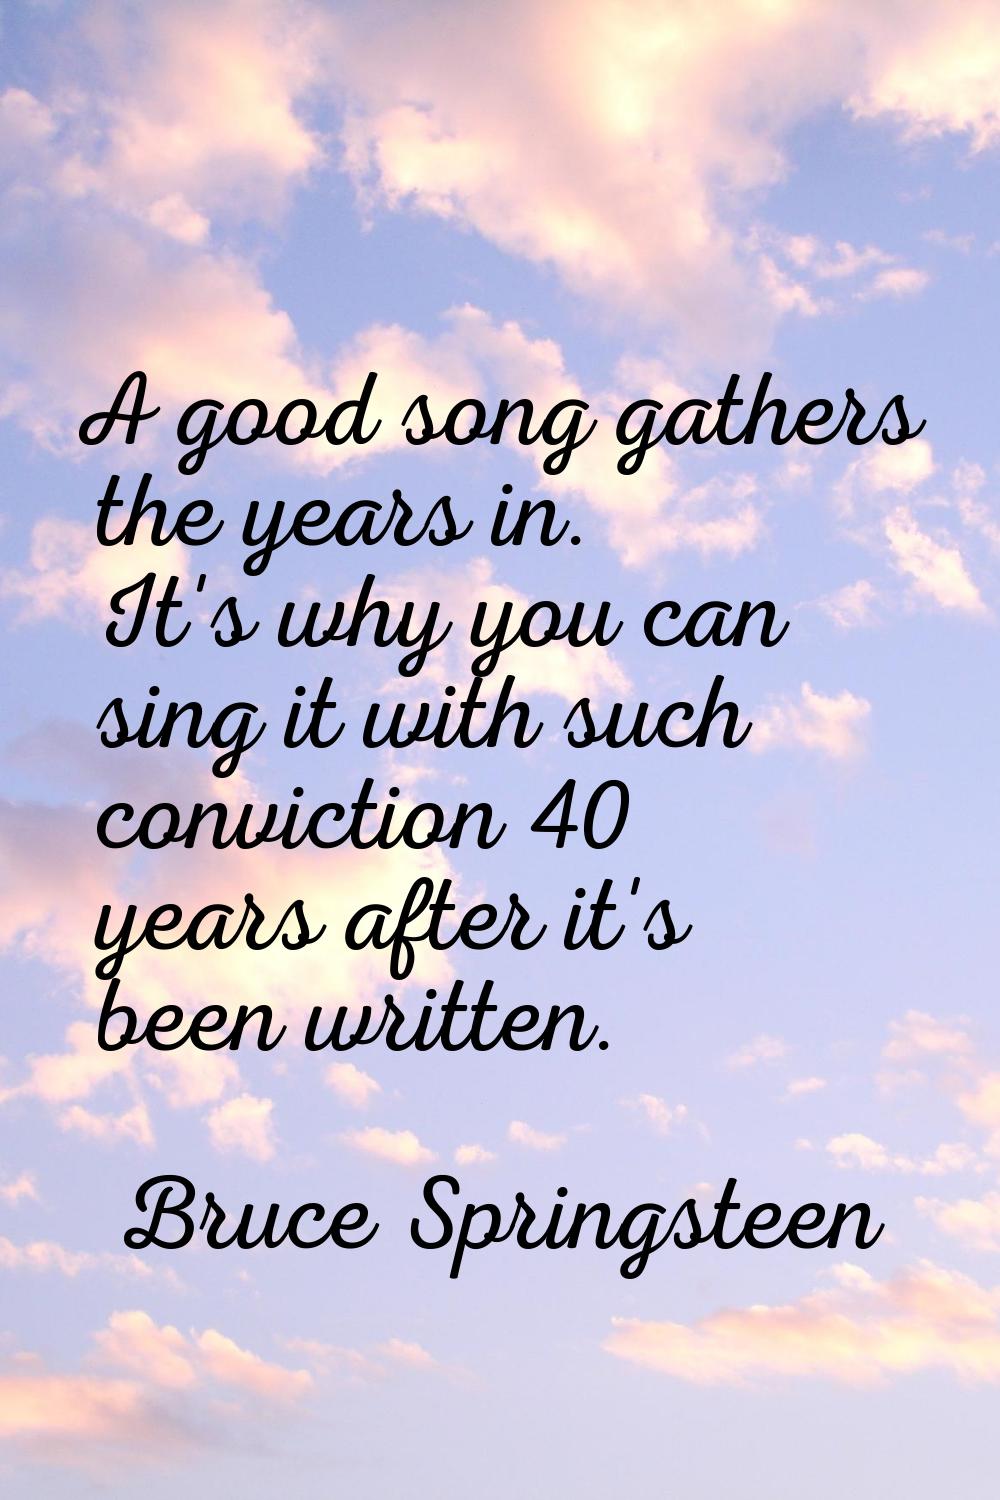 A good song gathers the years in. It's why you can sing it with such conviction 40 years after it's